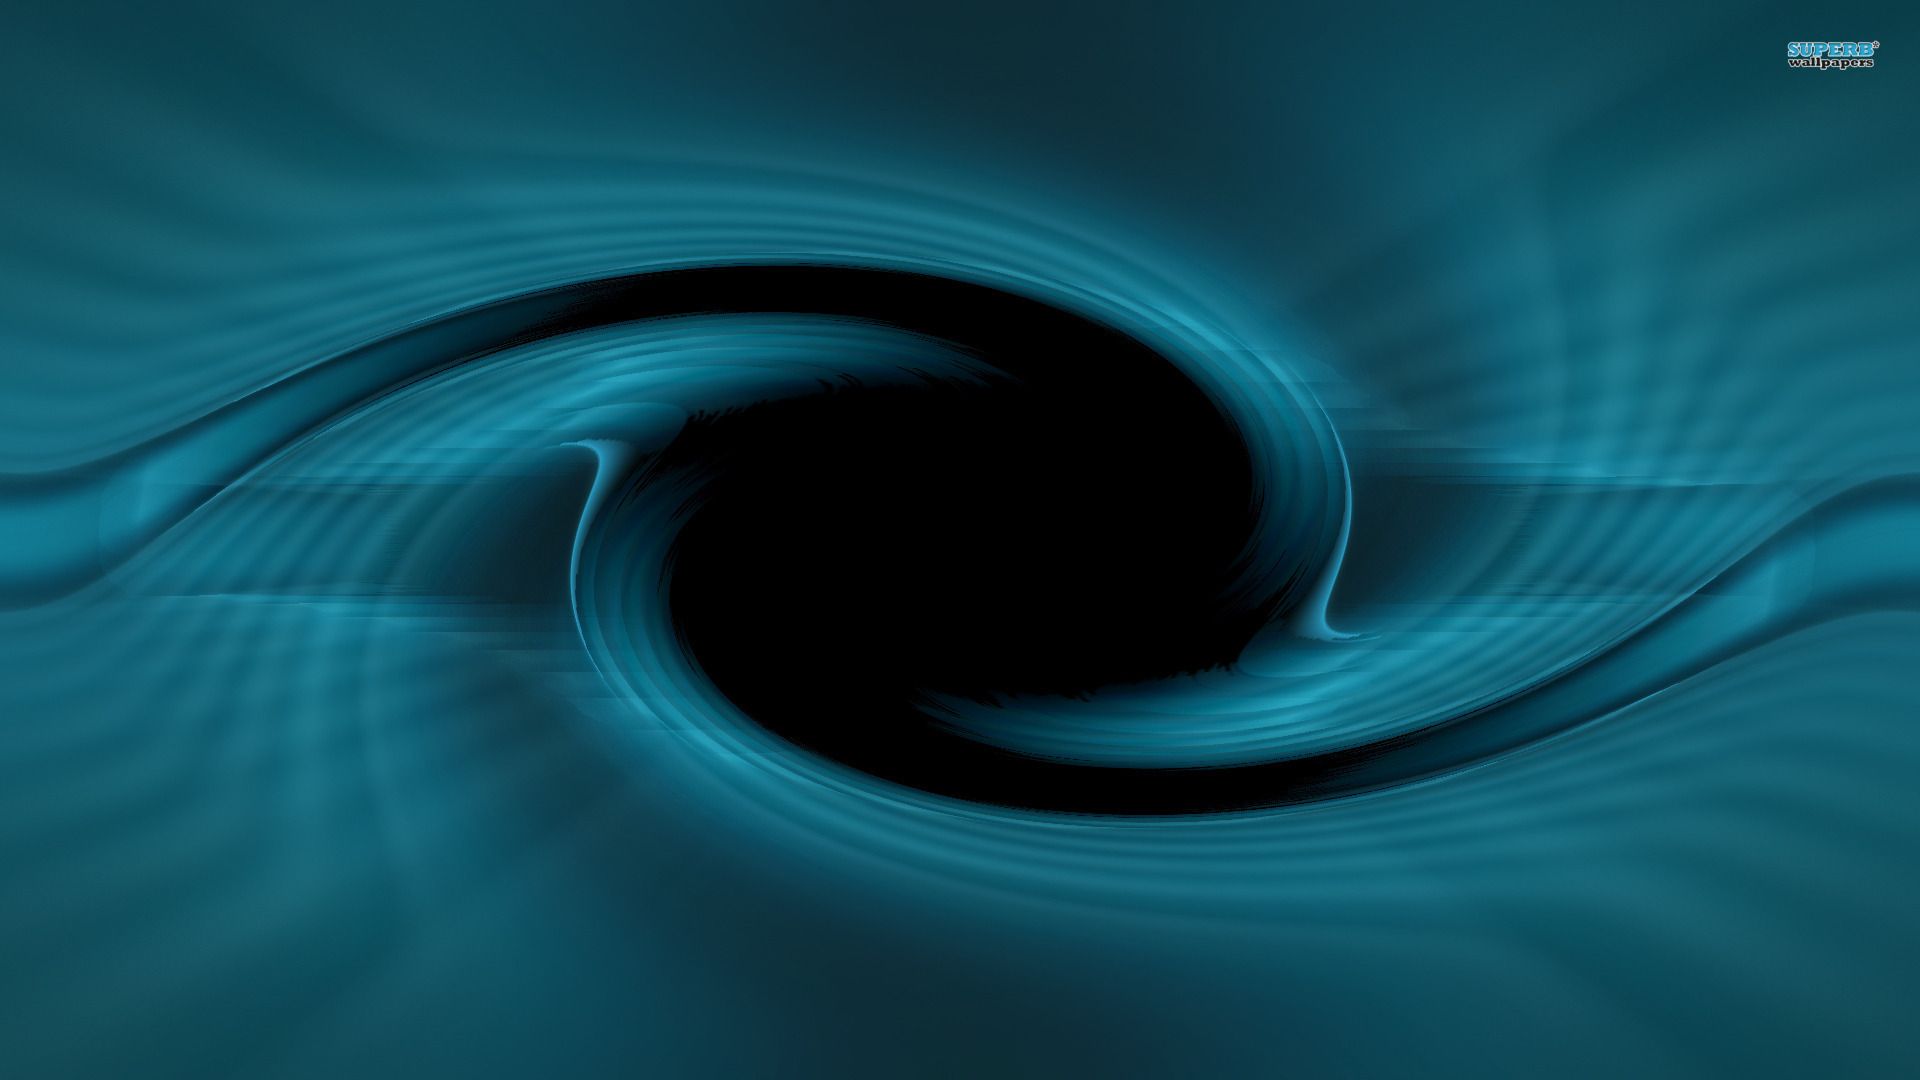 Black Hole Wallpaper 1920x1080 - Pics about space